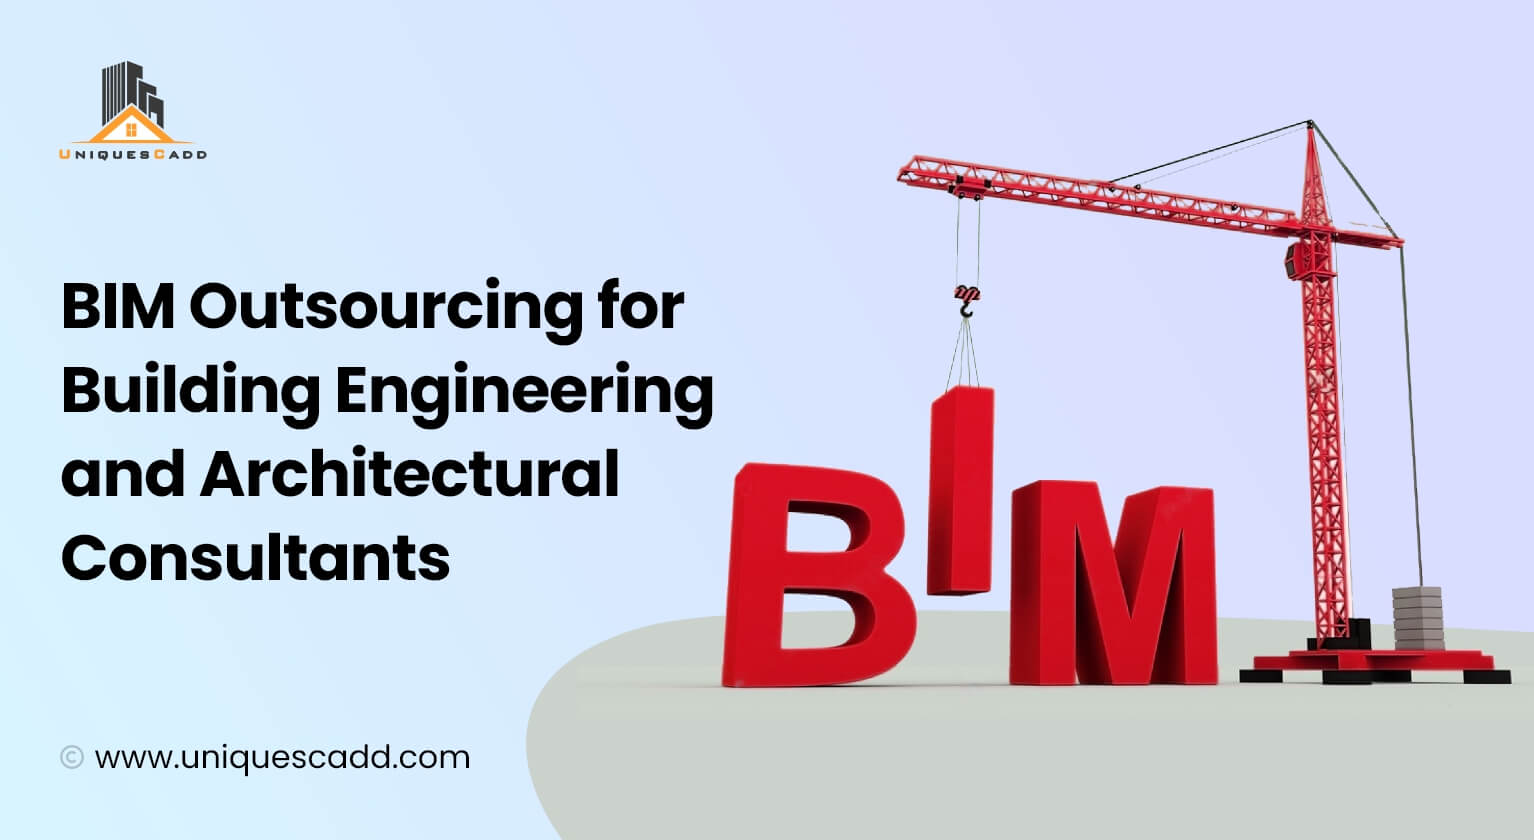 BIM Outsourcing for Building Engineering and Architectural Consultants